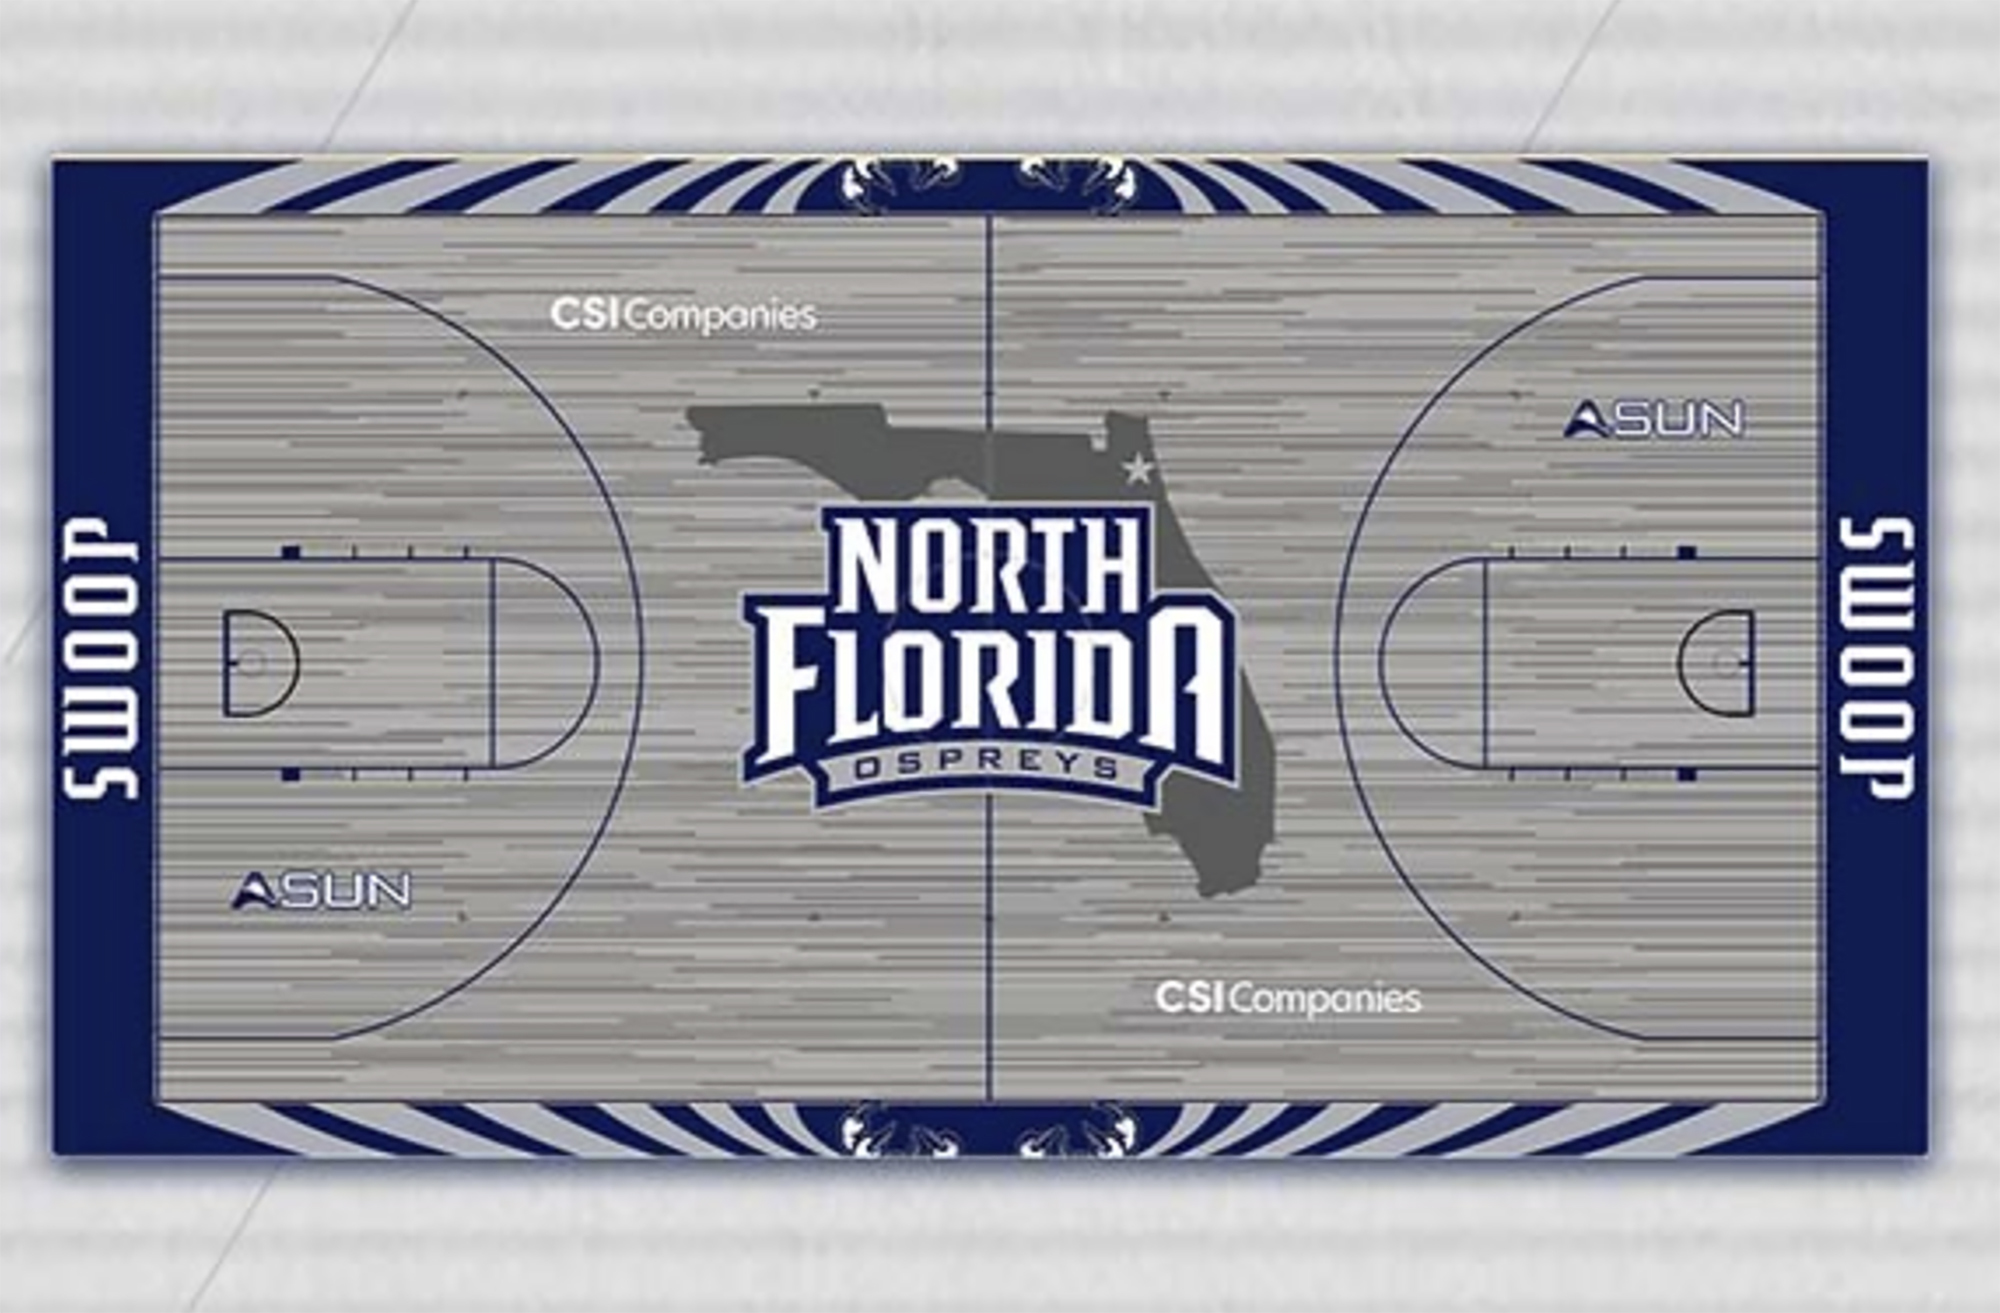 A new floor at UNF Arena is part of the partnership deal with CSI Companies.